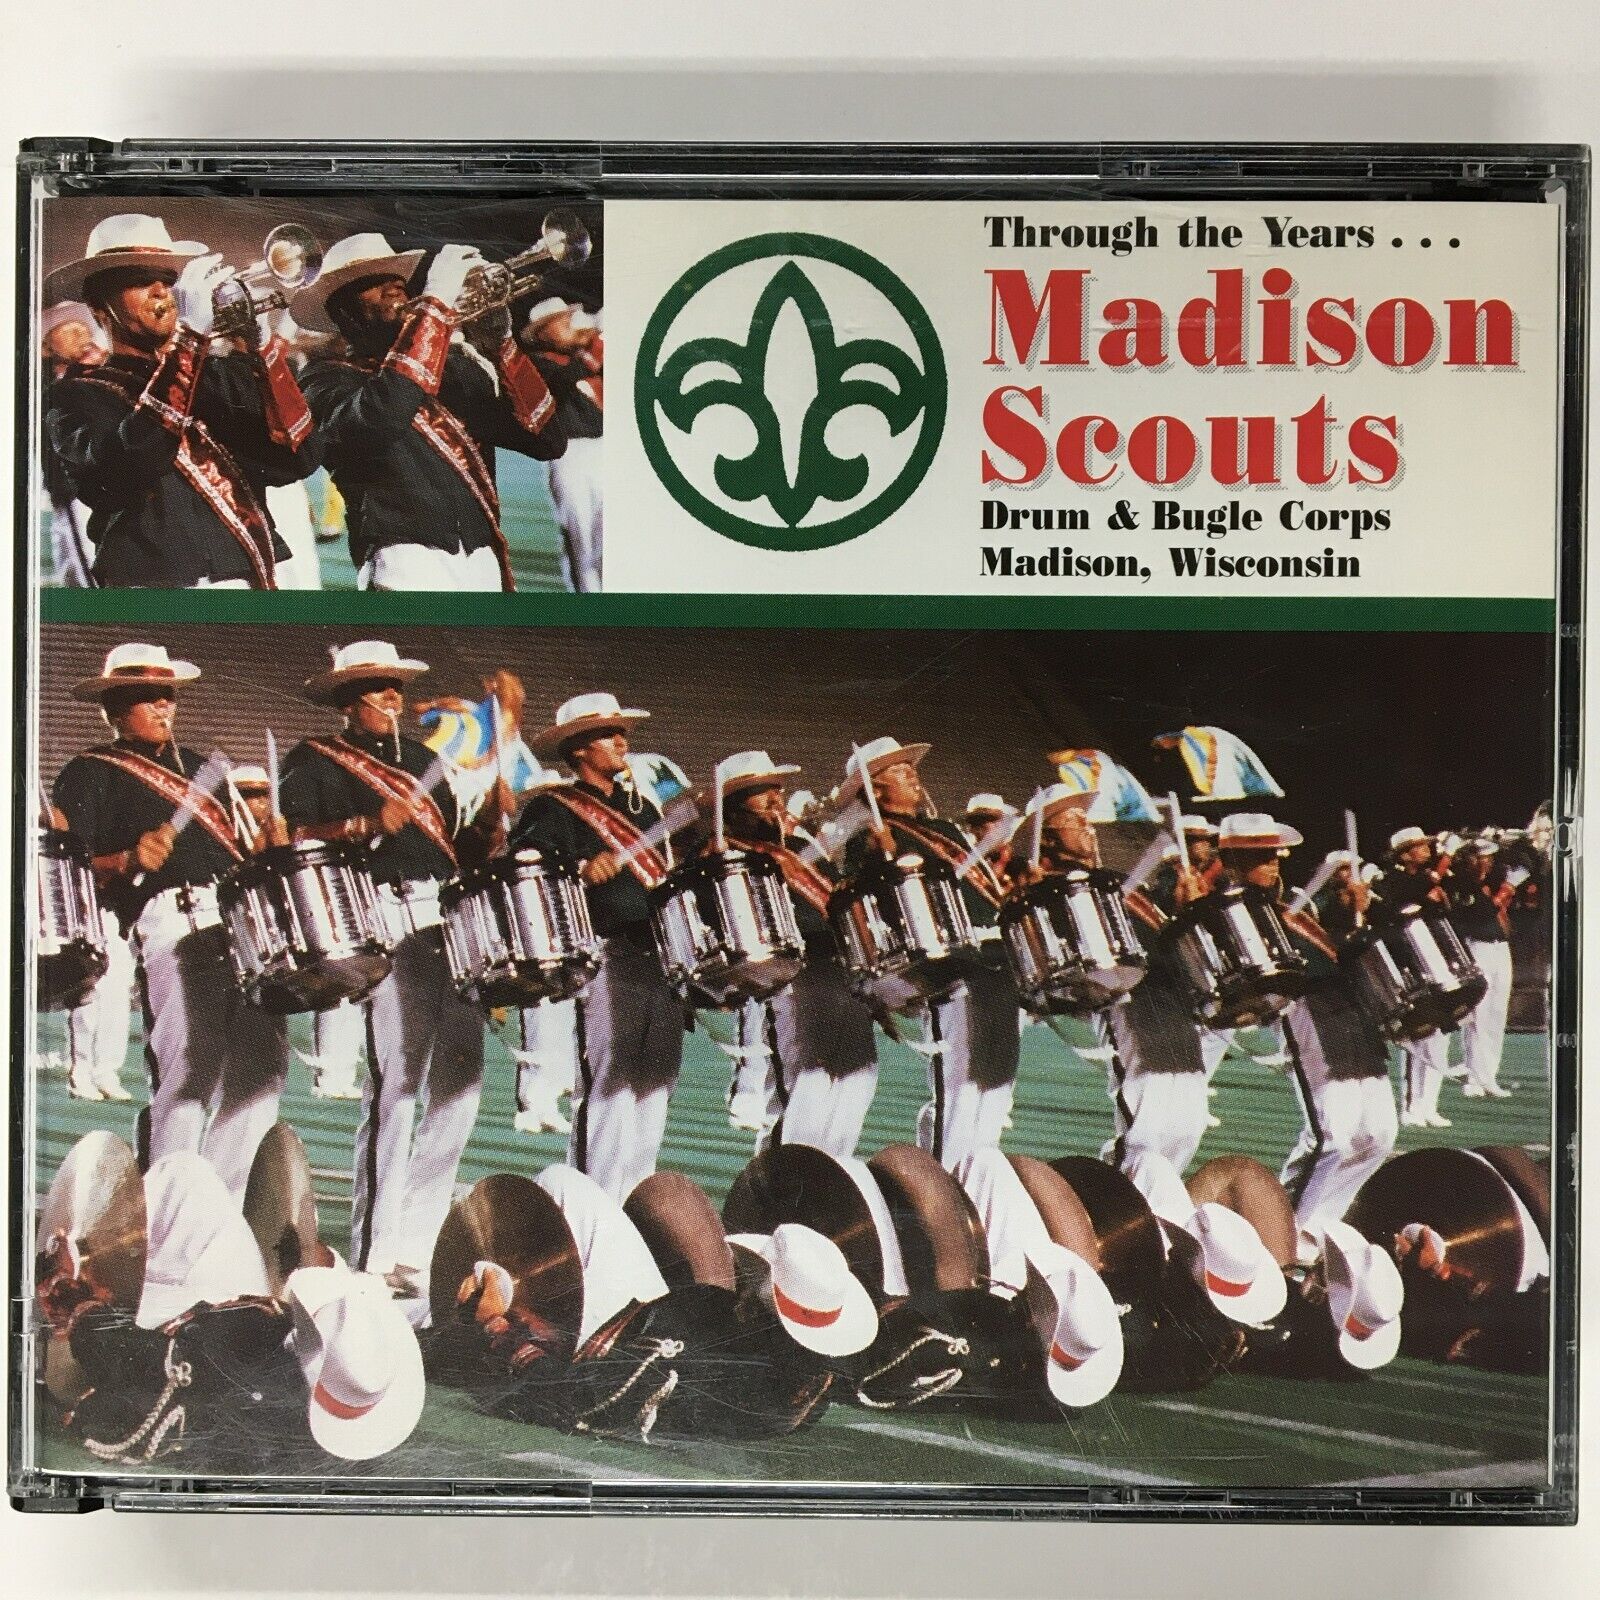 Through the Years: Madison Scouts Drum & Bugle Corps (2 CD Set, 1992) Wisconsin